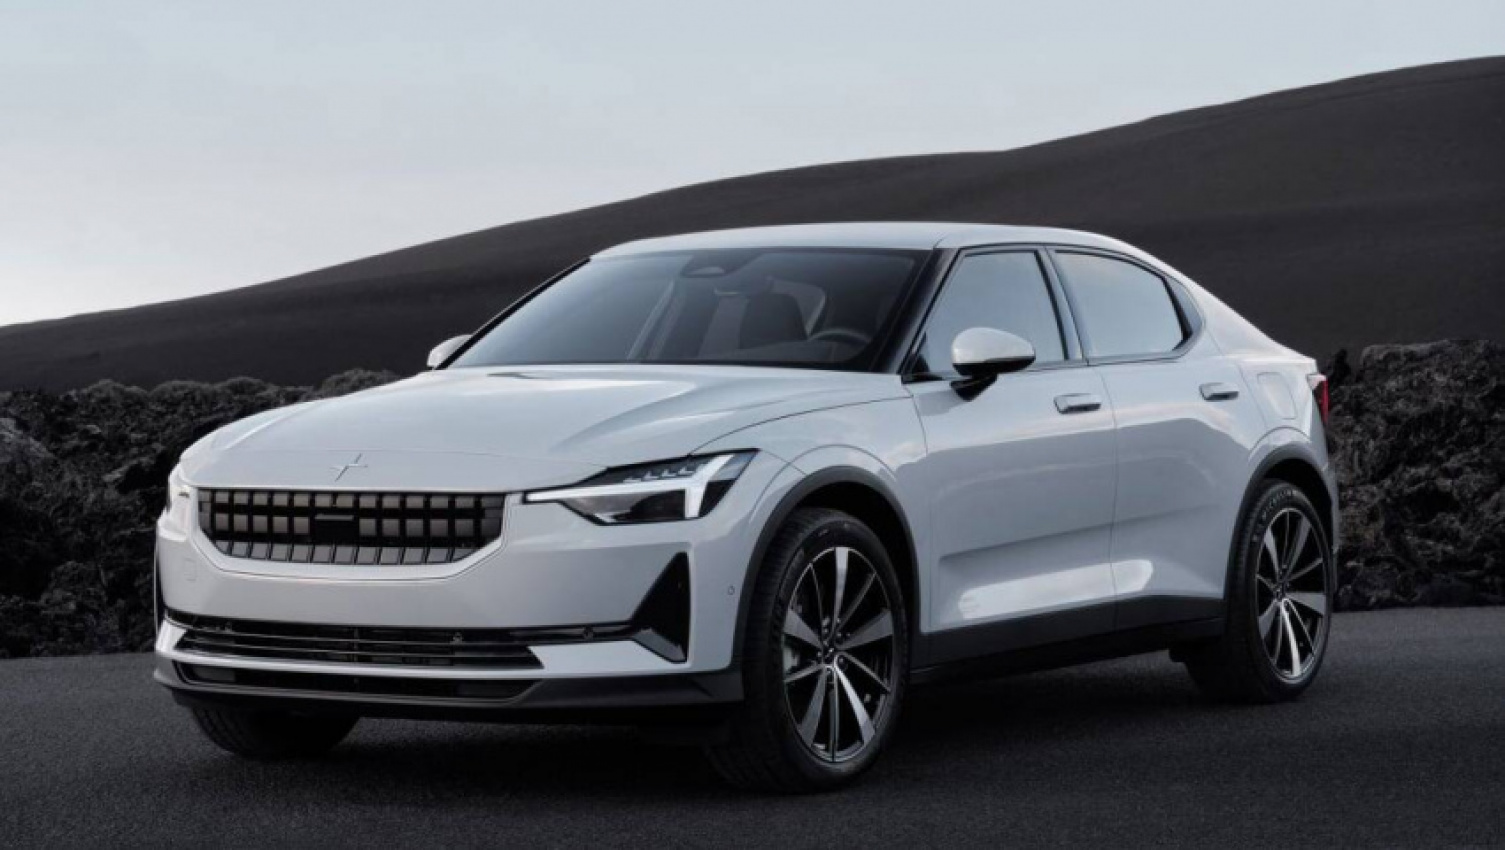 autos, cars, polestar, tesla, electric cars, industry news, polestar 2, polestar 2 2022, polestar news, showroom news, tesla model 3, safer than 2022 tesla model 3? new polestar electric car gets five-star safety rating - but does the new ev outperform its archrival?